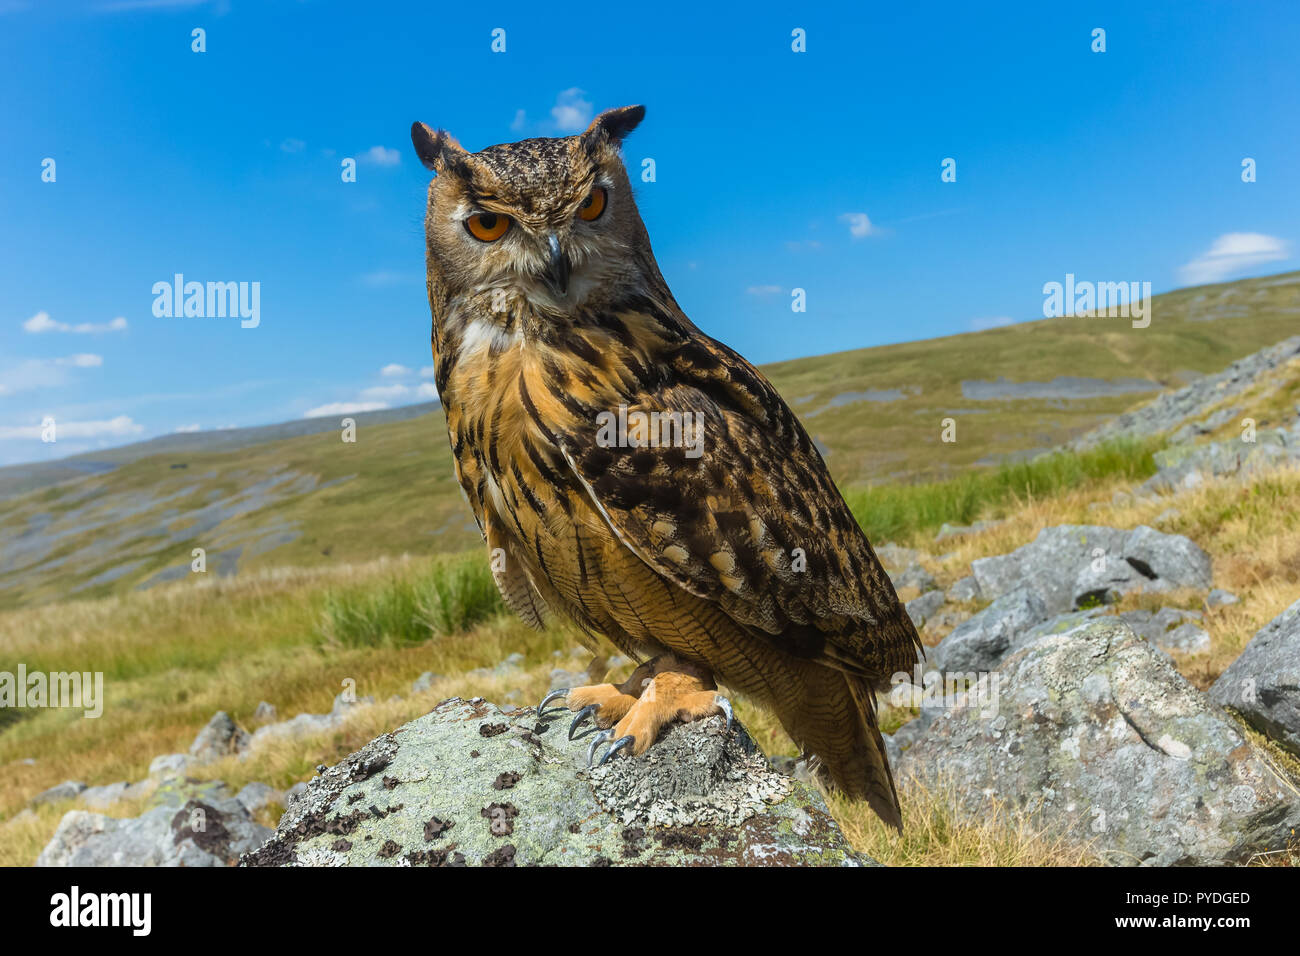 Eagle owl, also known as the Eurasian or European eagle owl.  Scientific name: Bubo bubo, perched on lichen covered rock in the English Lake District Stock Photo